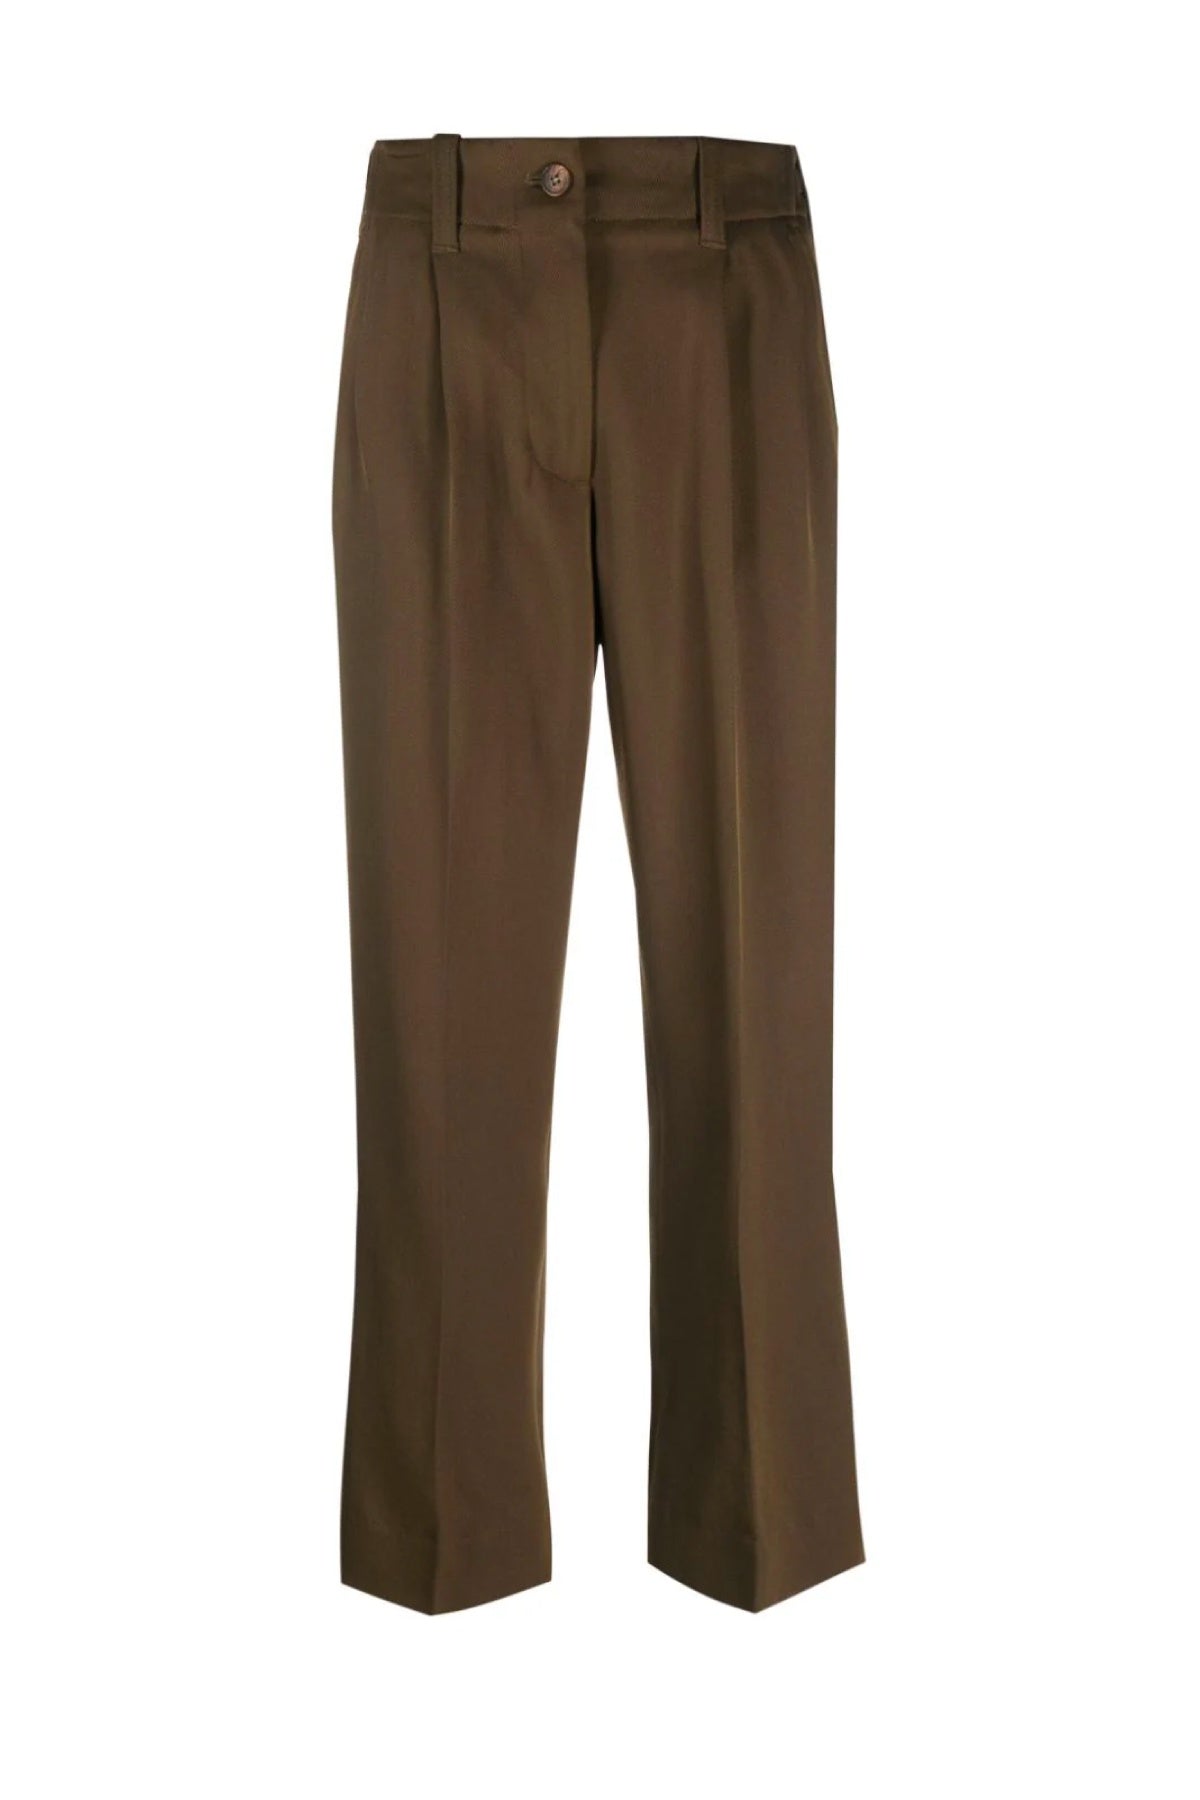 Golden Goose Tapered Wool Twill Pant - Beech